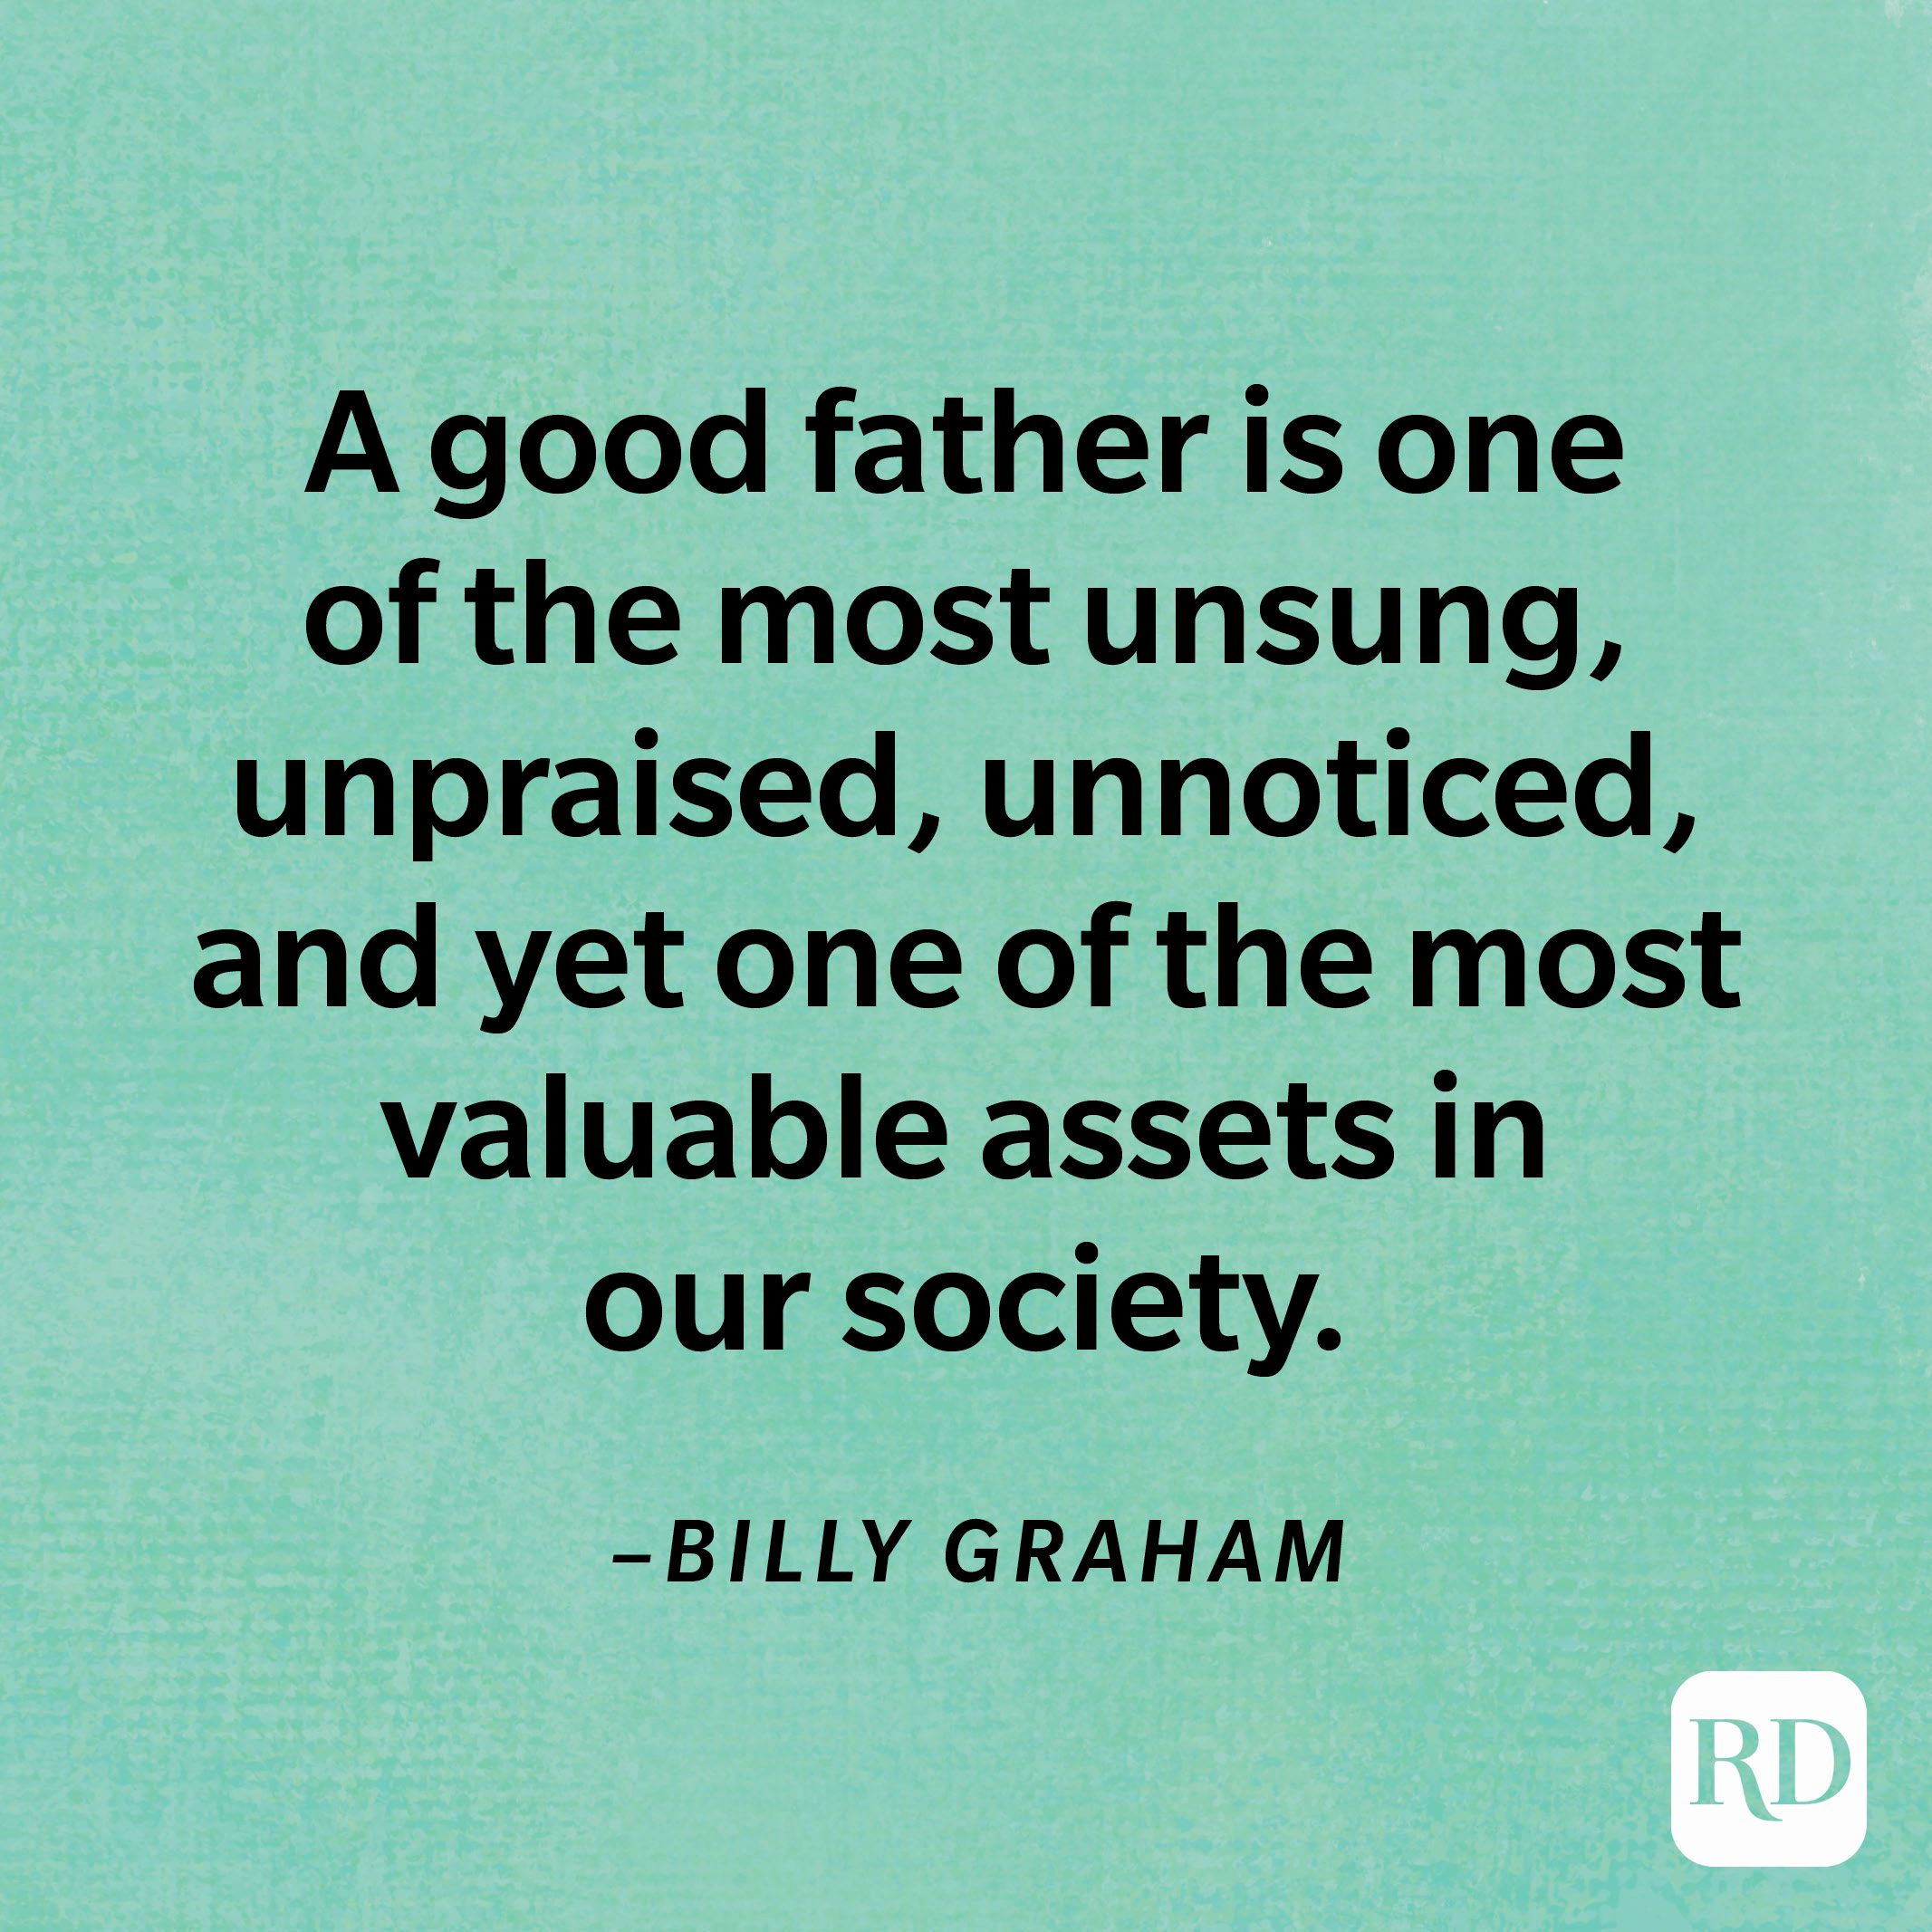 “A good father is one of the most unsung, unpraised, unnoticed, and yet one of the most valuable assets in our society.”—Billy Graham